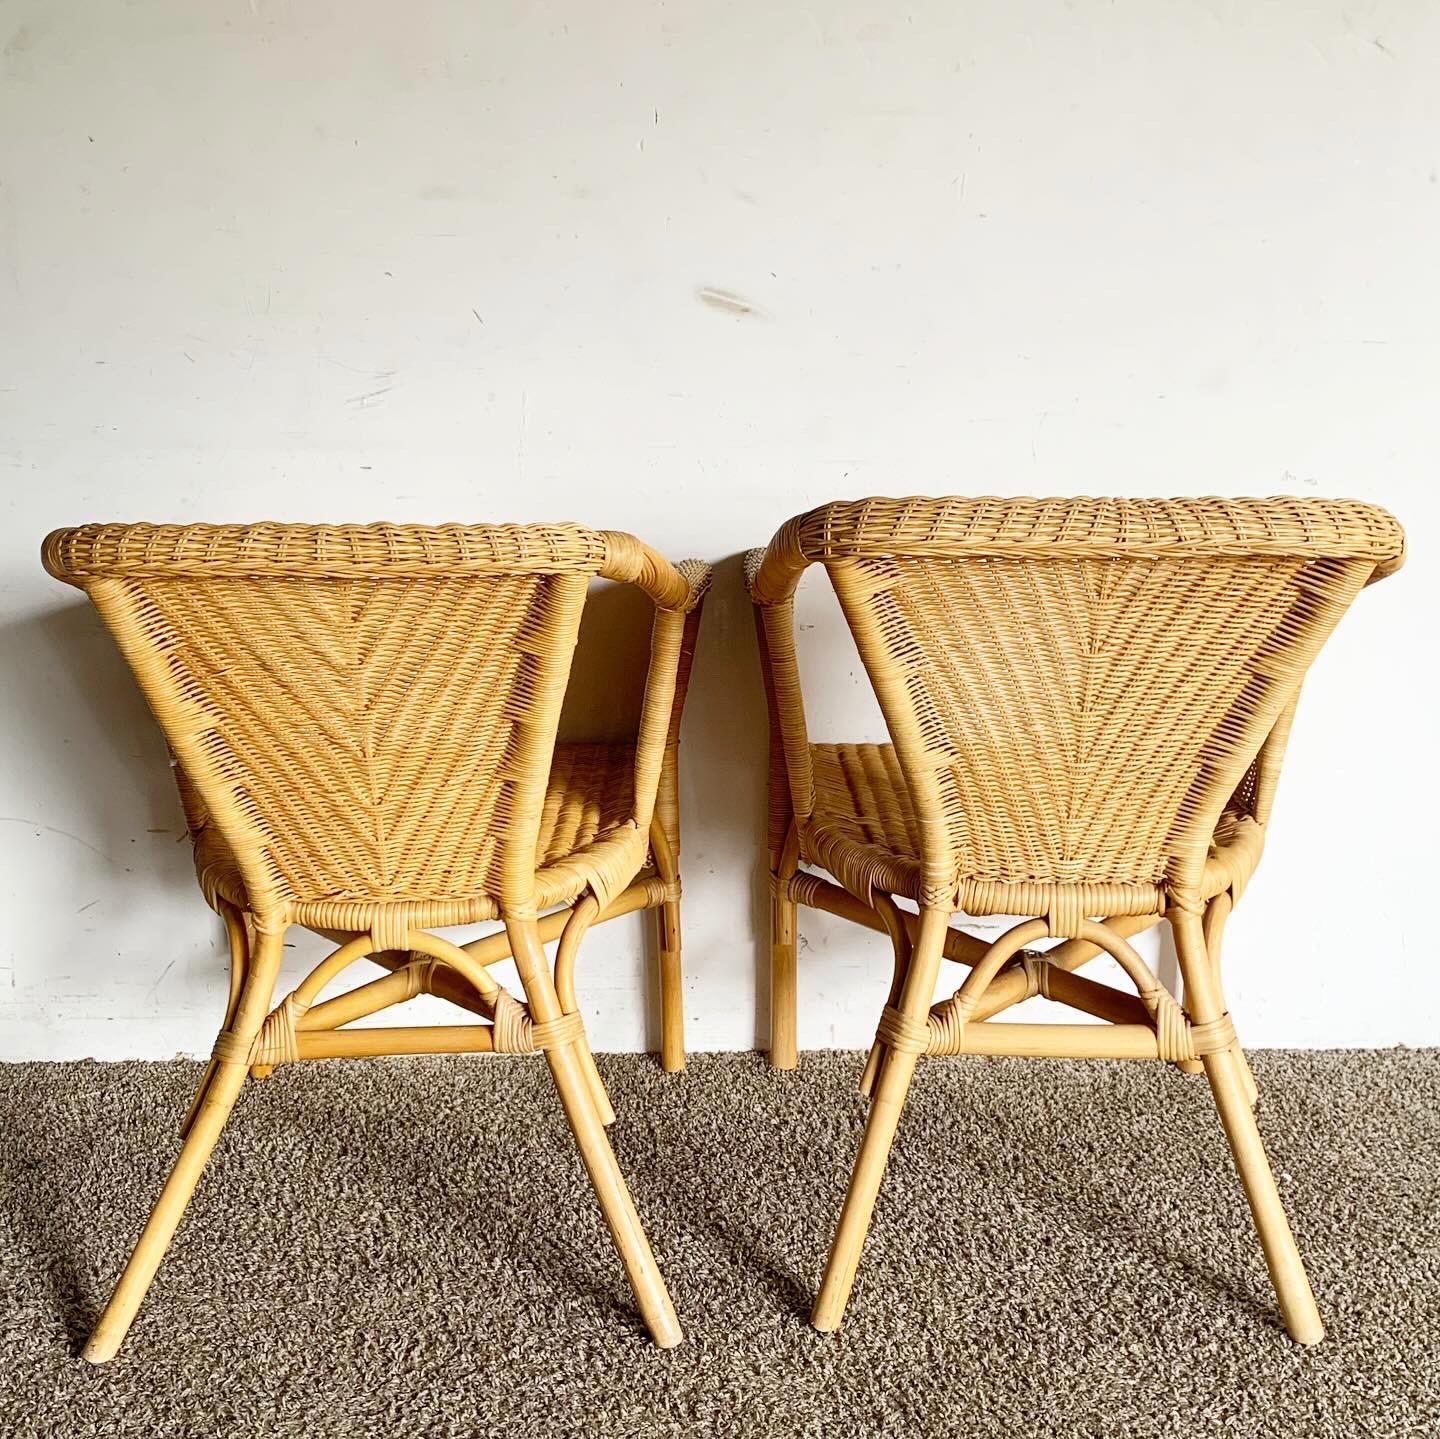 20th Century Boho Chic Wicker and Rattan Dining Arm Chairs - Set of 4 For Sale